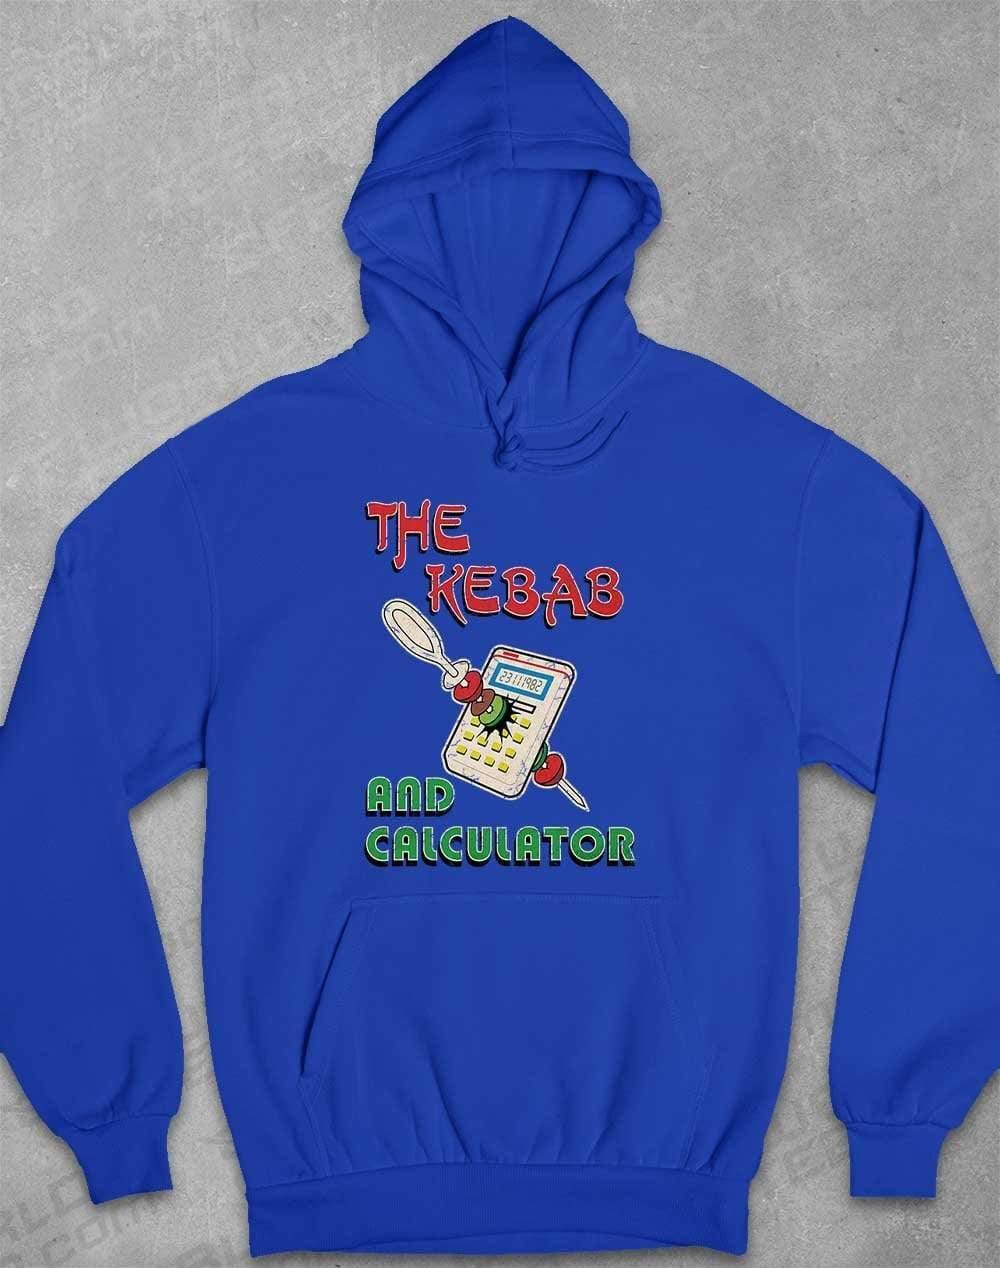 The Kebab and Calculator 1982 Hoodie XS / Royal Blue  - Off World Tees